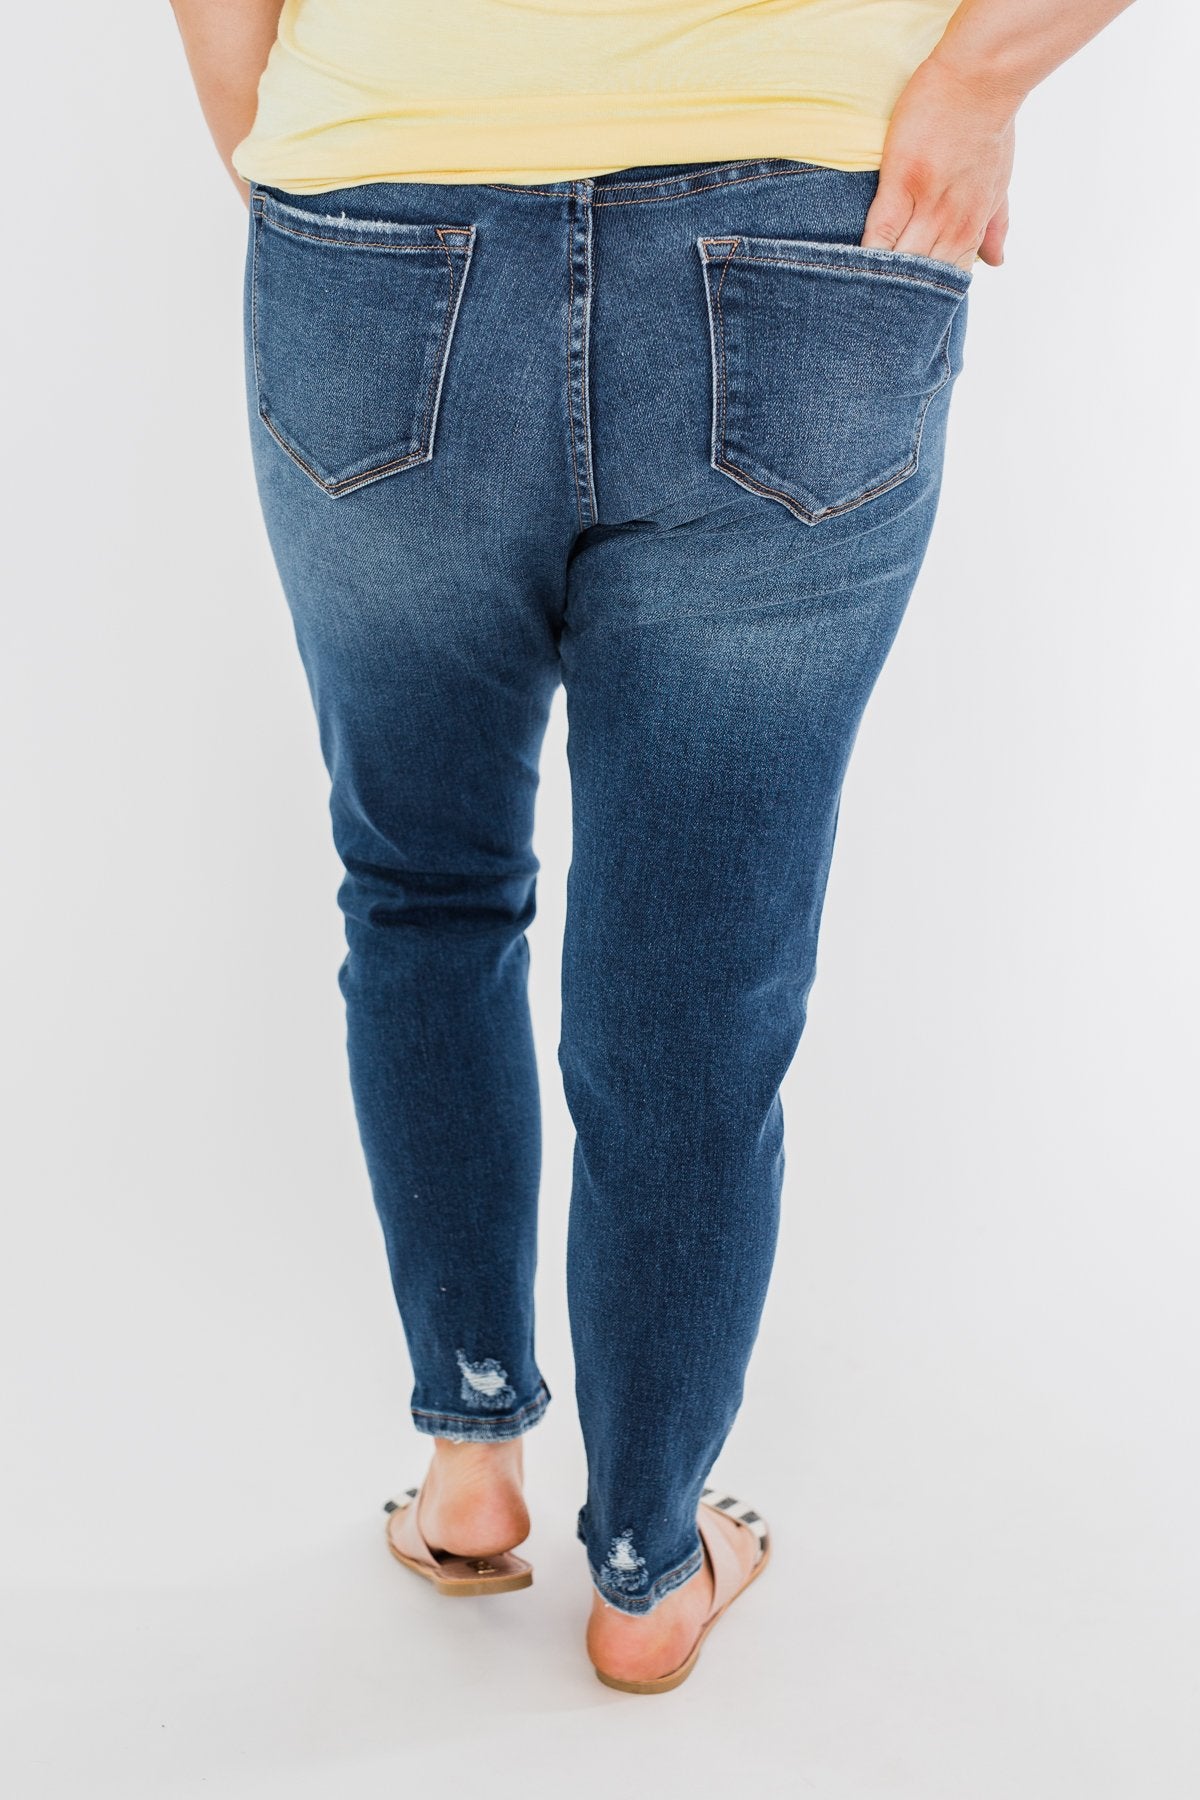 KanCan Ankle Skinny Jeans- Clarissa Wash